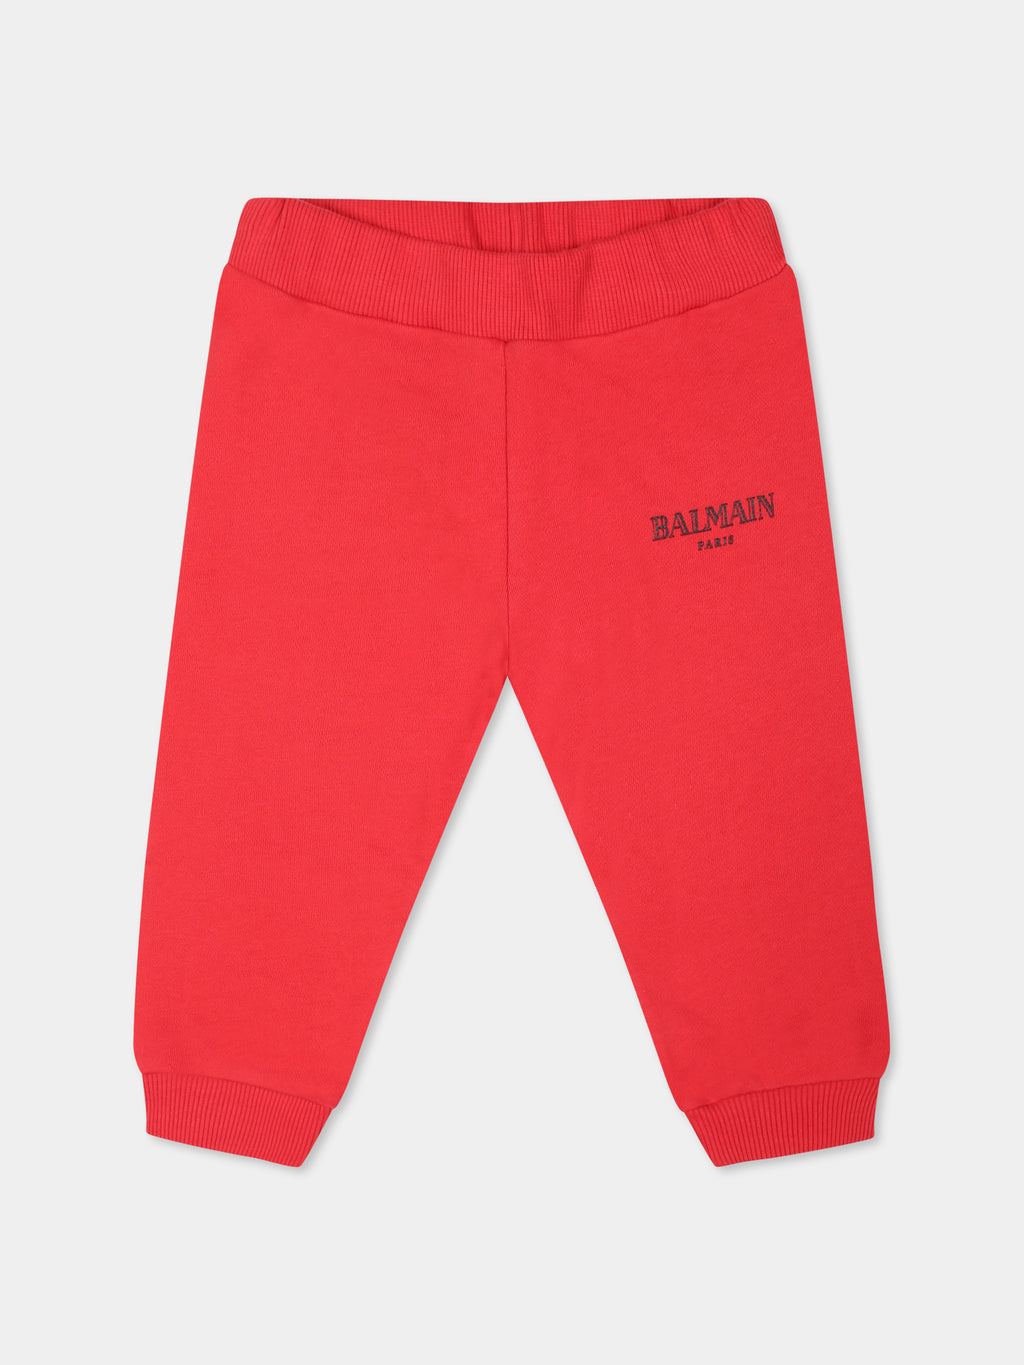 Red trousers for babykids with logo